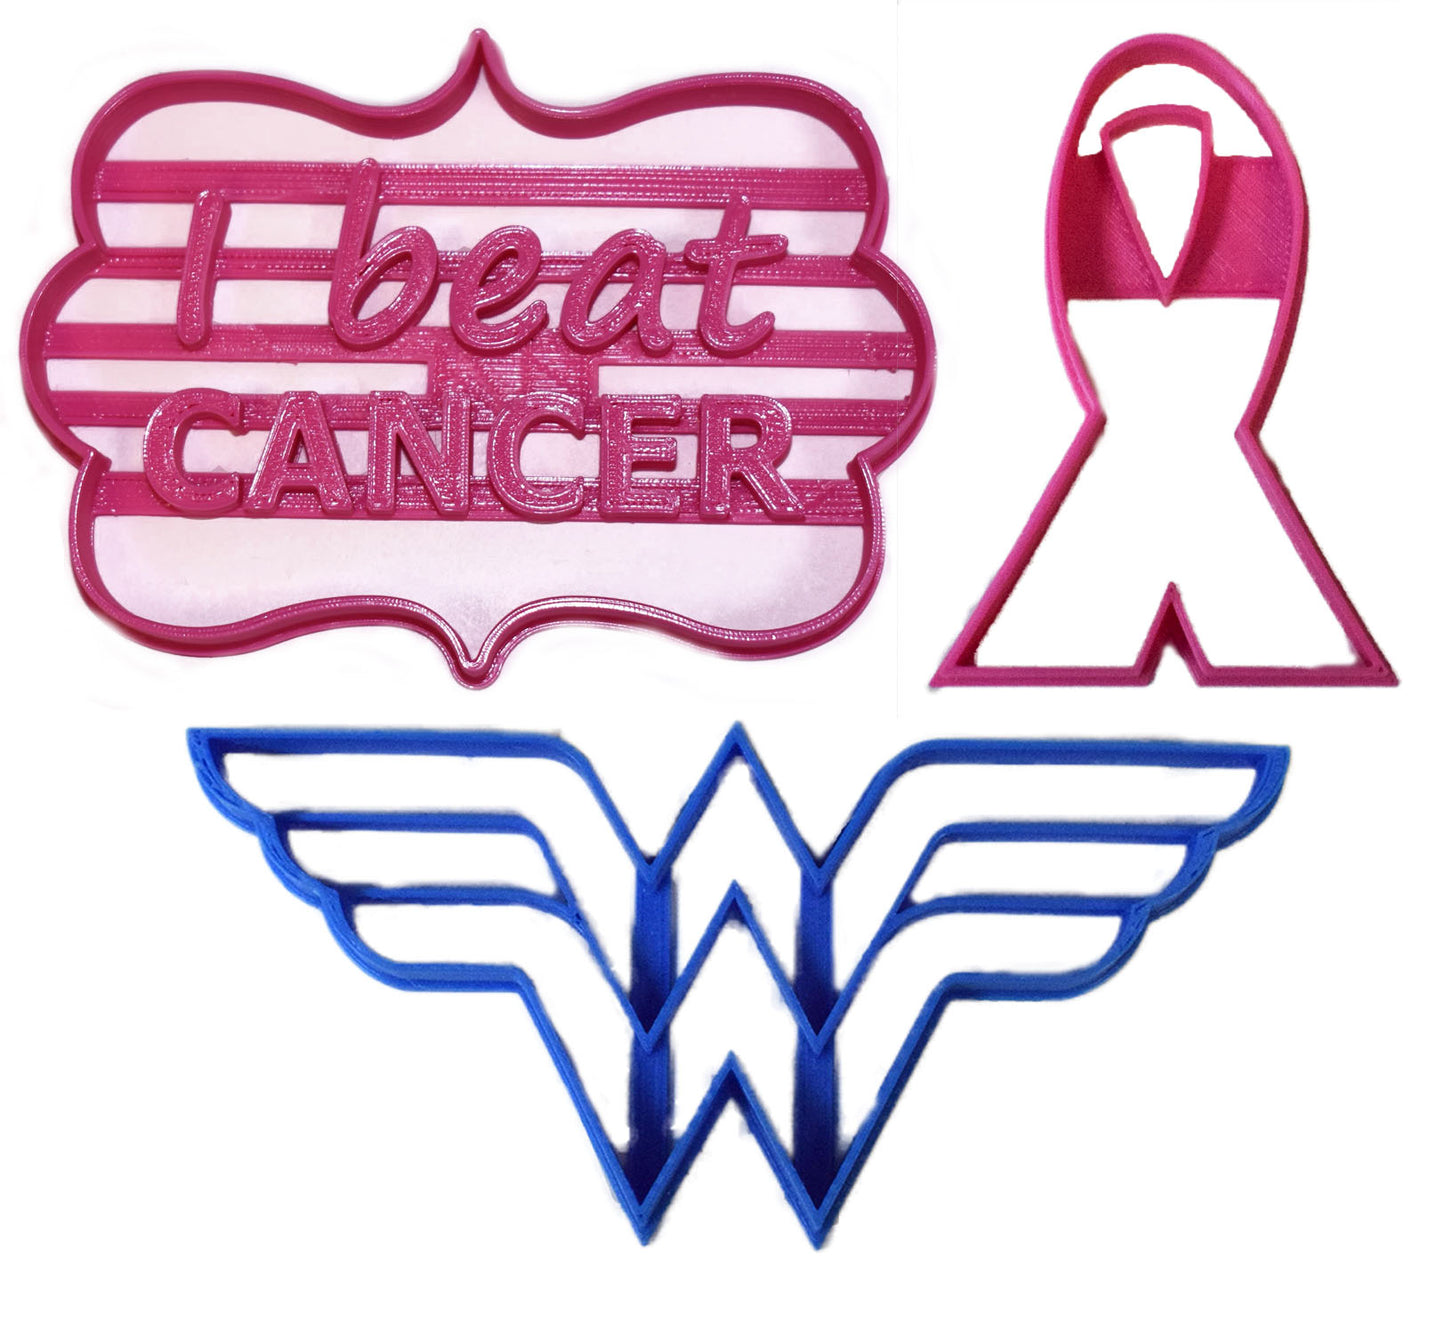 Cancer Survivors Are Superheroes Wonder Woman Set Of 3 Cookie Cutters USA PR1021